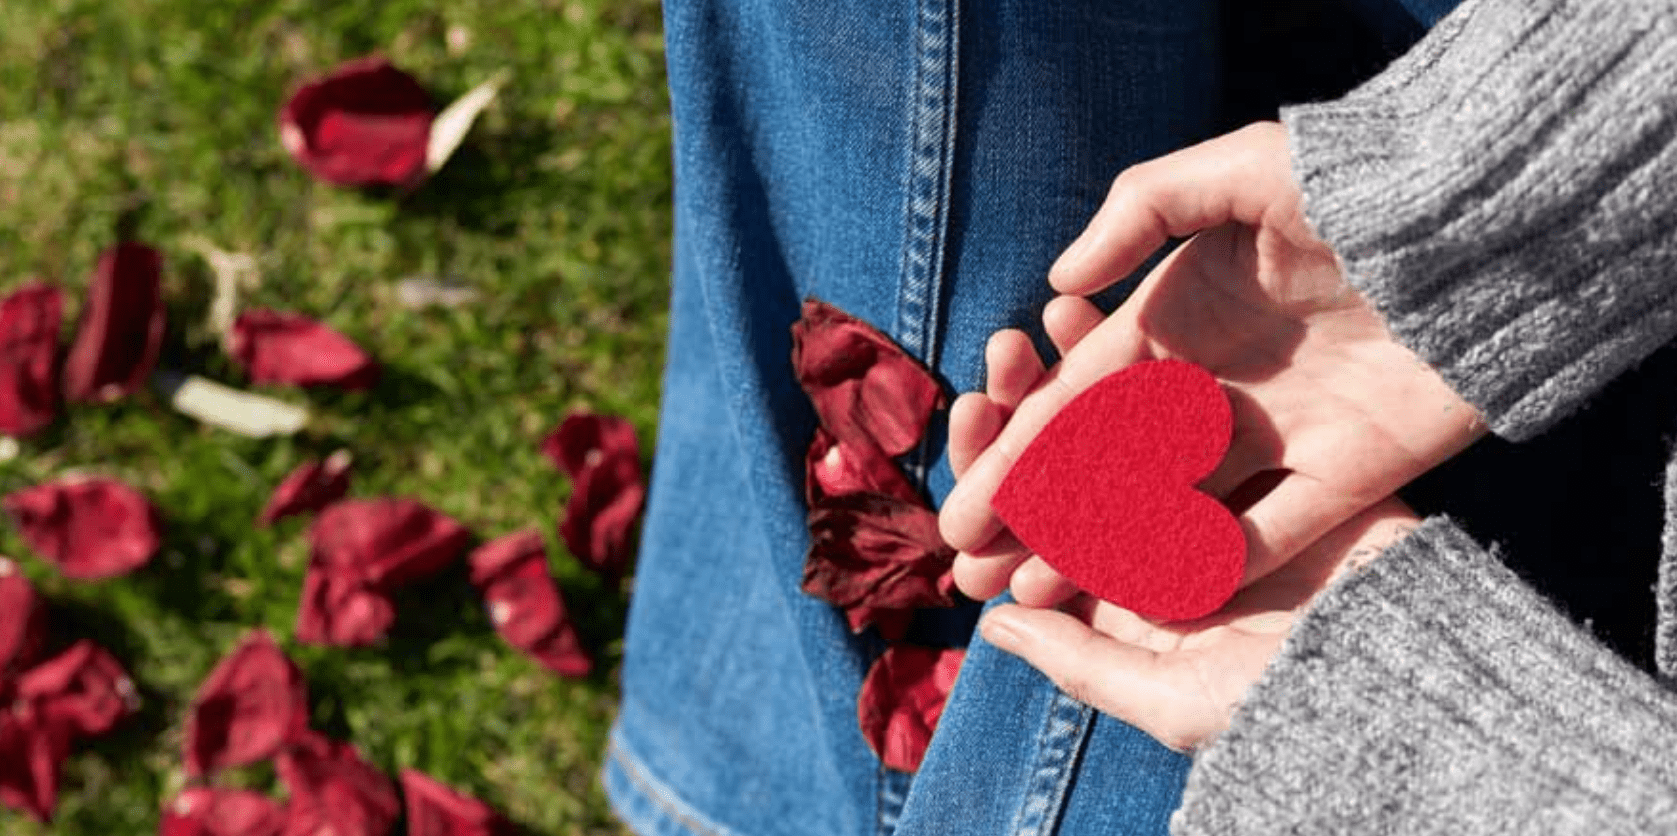 How to Practice Intimate Forms of Self Love